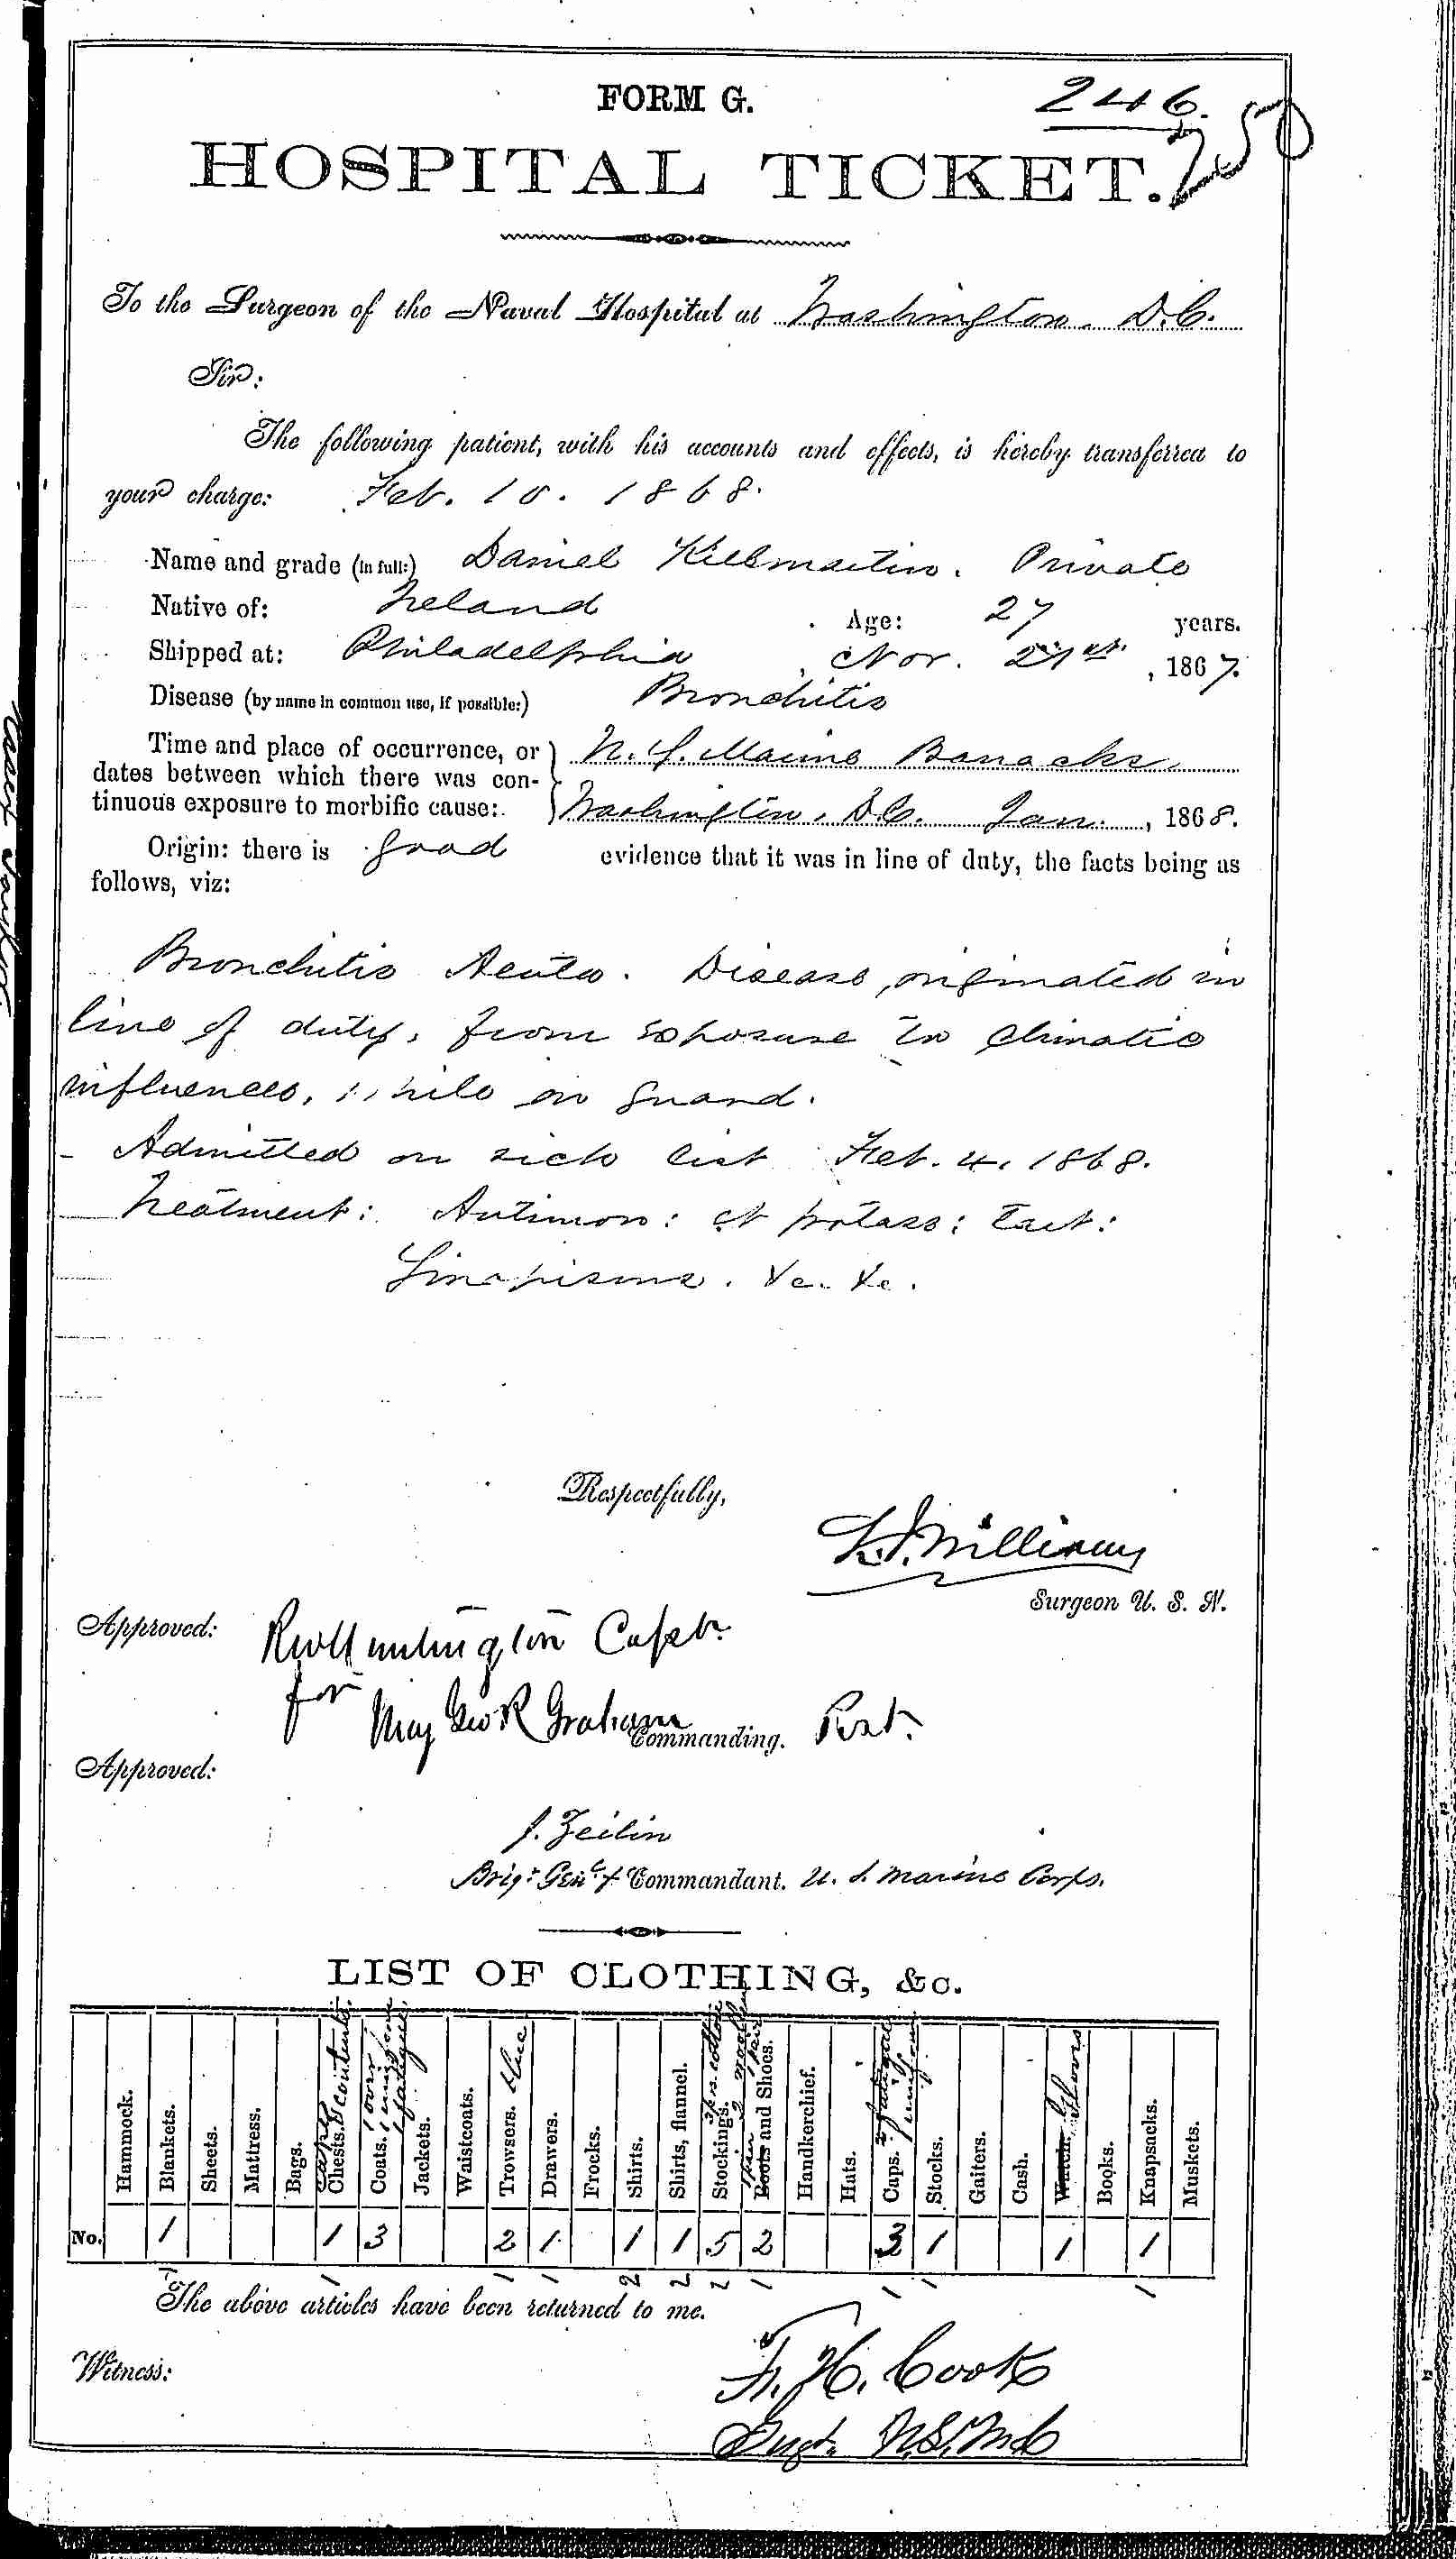 Entry for Daniel Killmartin (page 1 of 2) in the log Hospital Tickets and Case Papers - Naval Hospital - Washington, D.C. - 1866-68